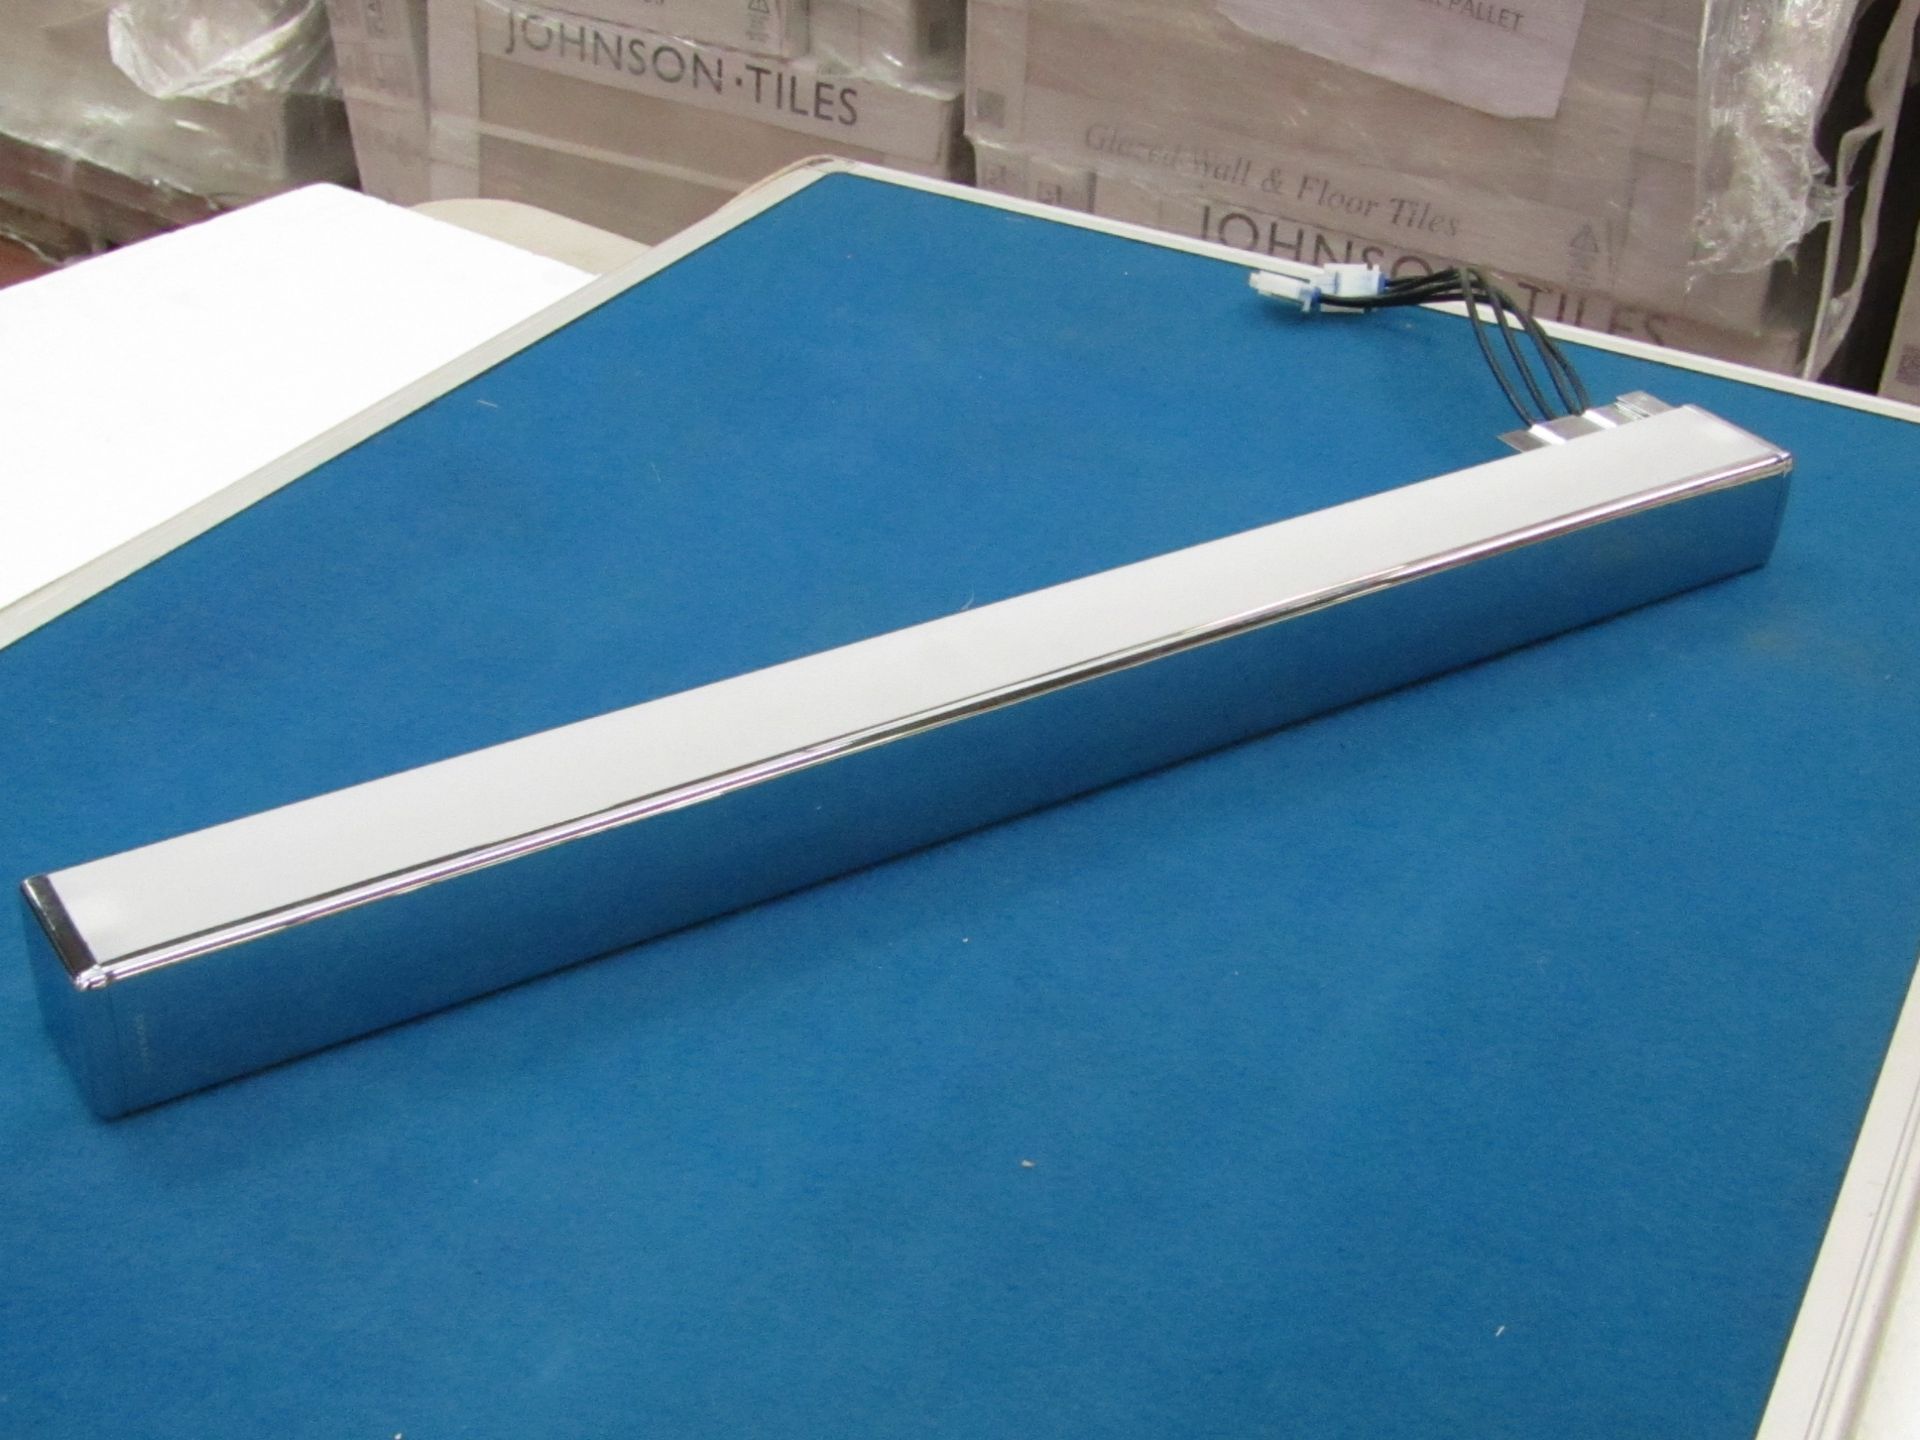 Cosmic light Fluorescent wall light , new and boxed